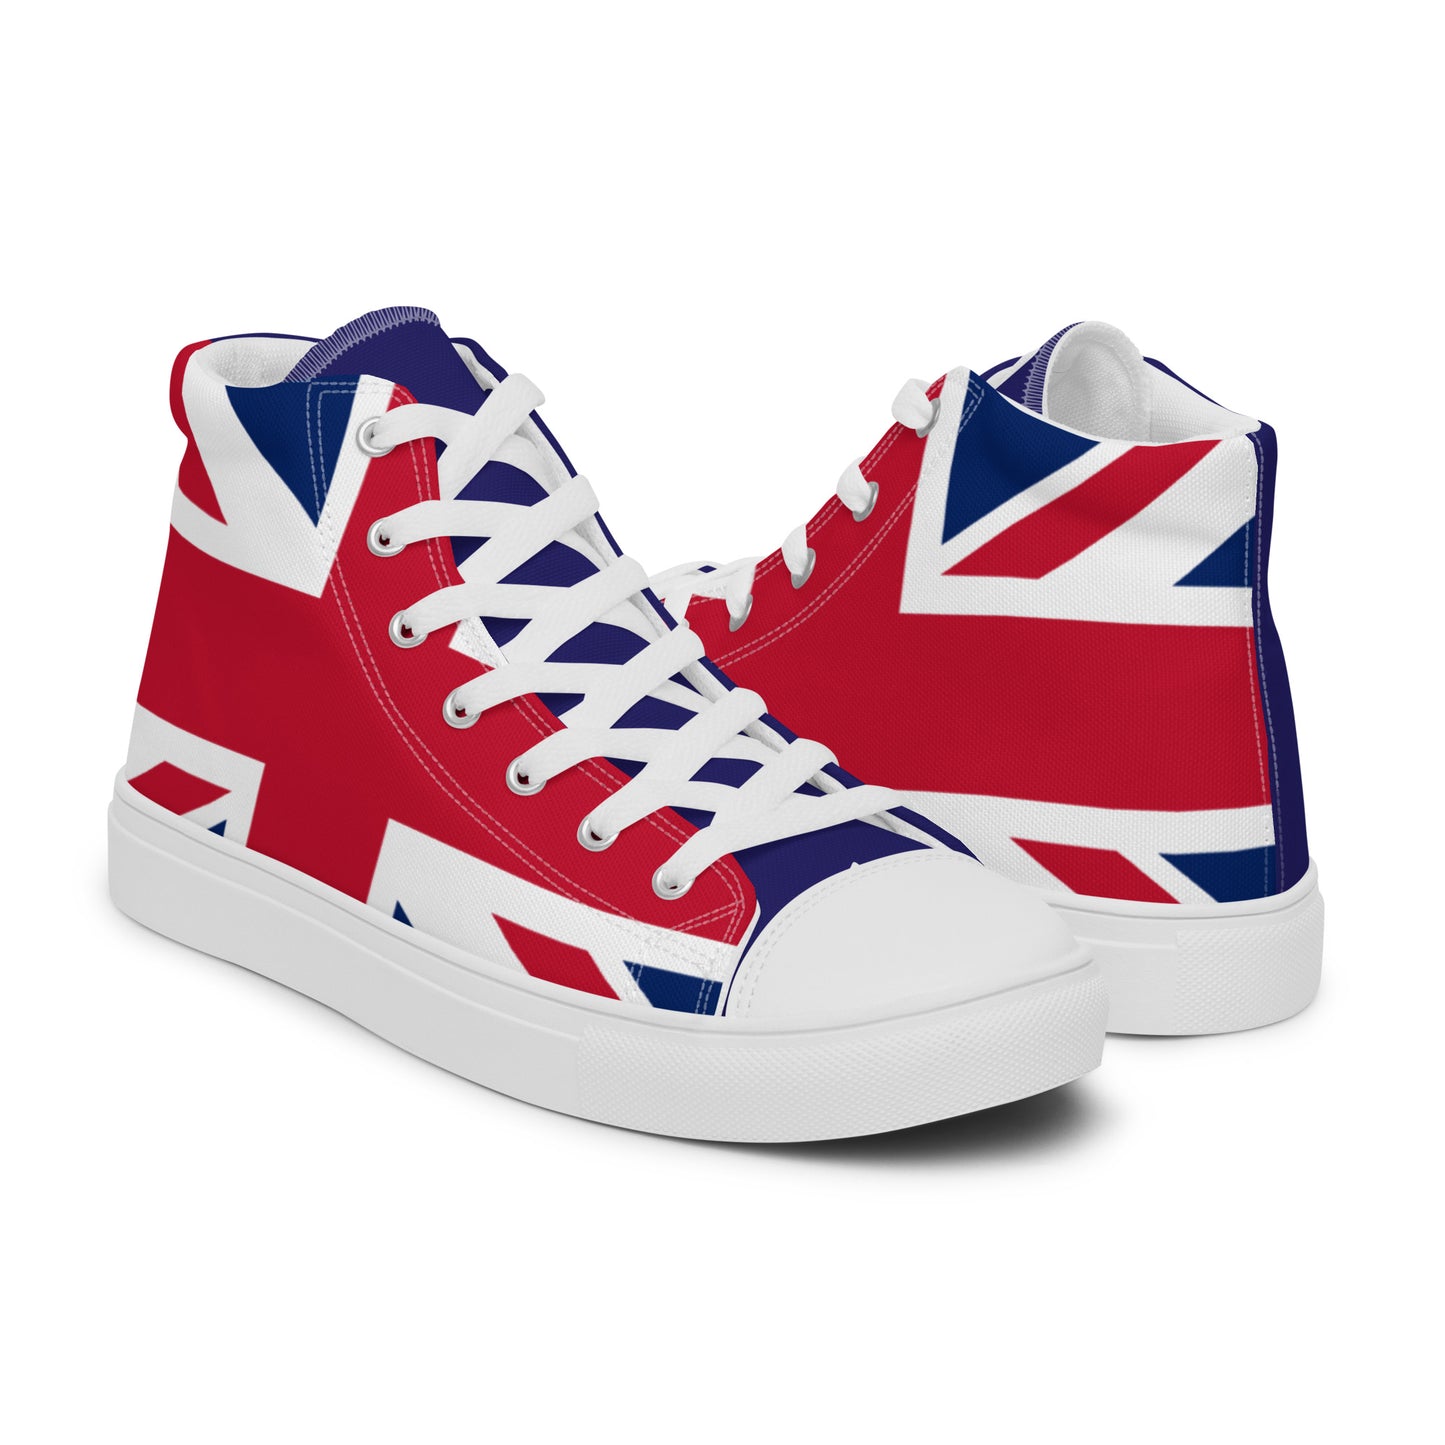 U.K Flag - Sustainably Made Men’s high top canvas shoes